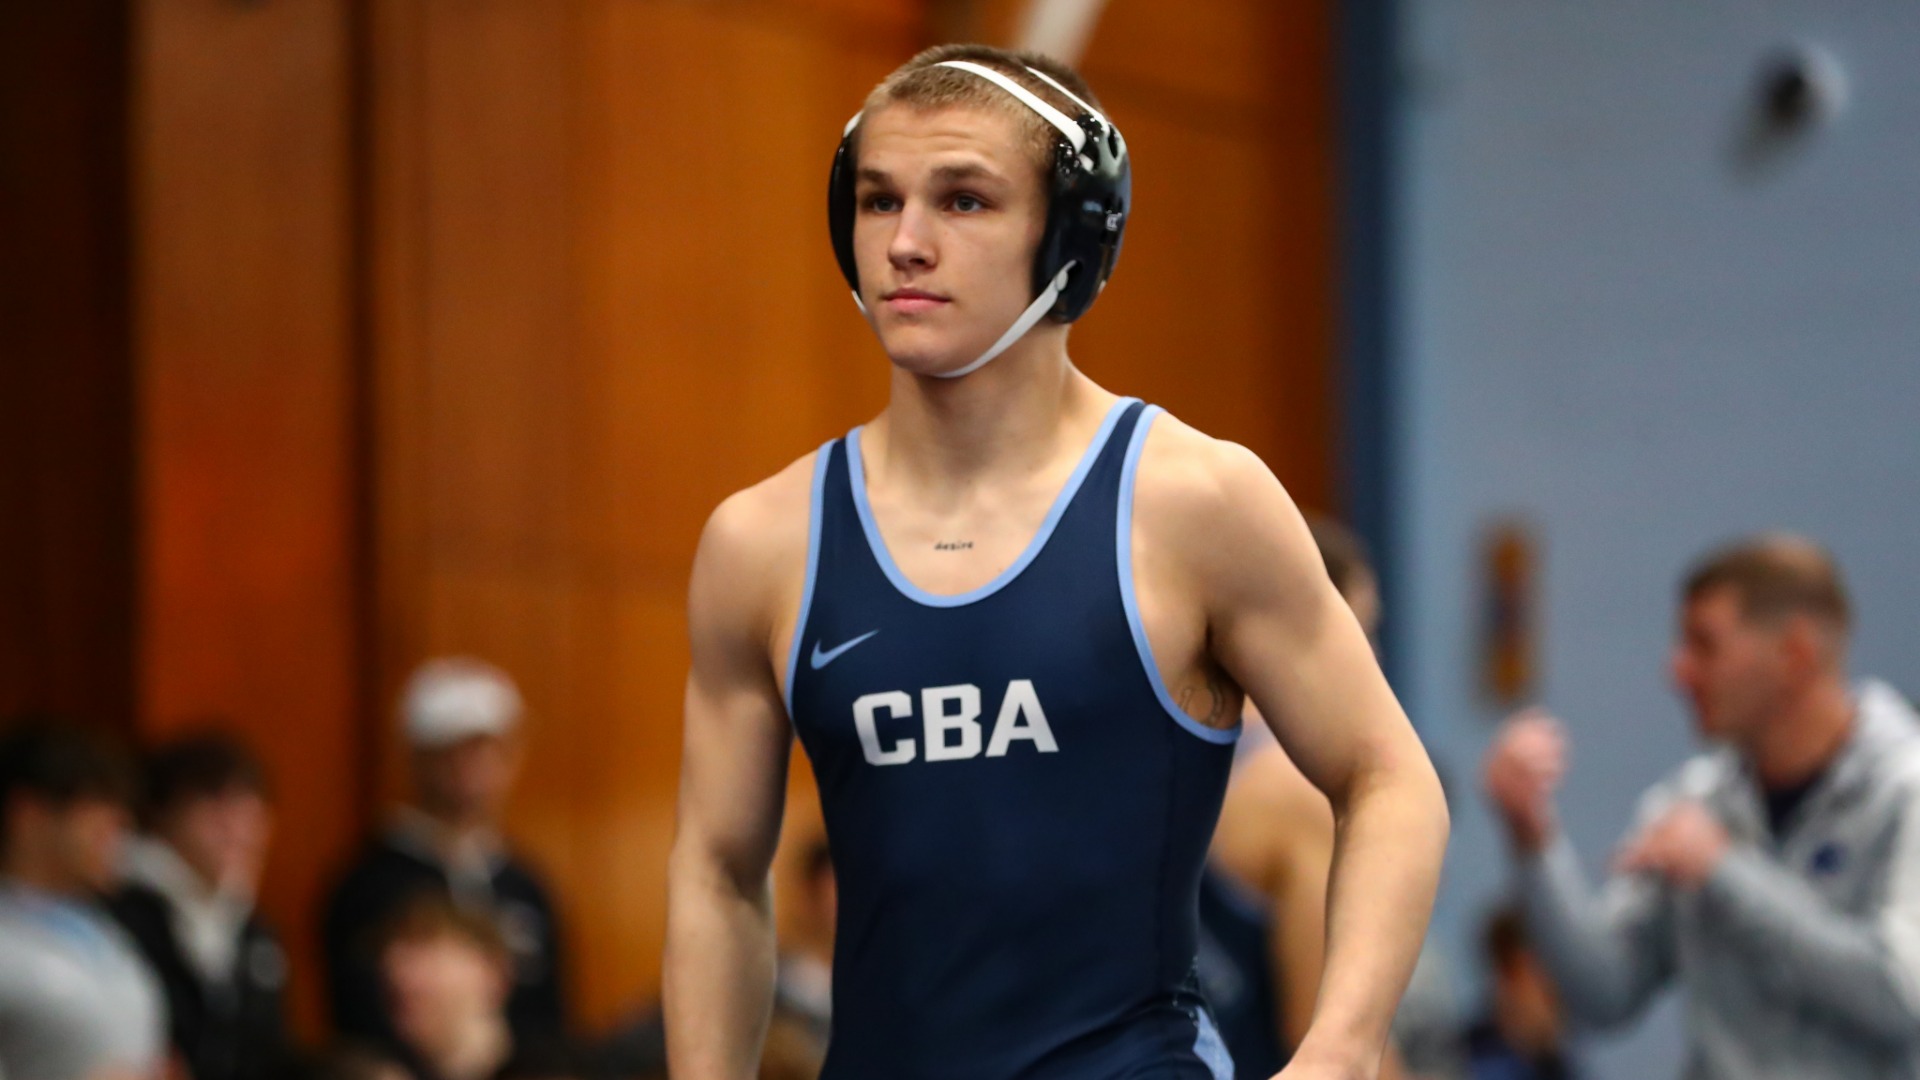 CBASlide 0 - CBA WINS DISTRICT AND REGION, FIVE WRESTLERS PLACE AT INDIVIDUAL STATES